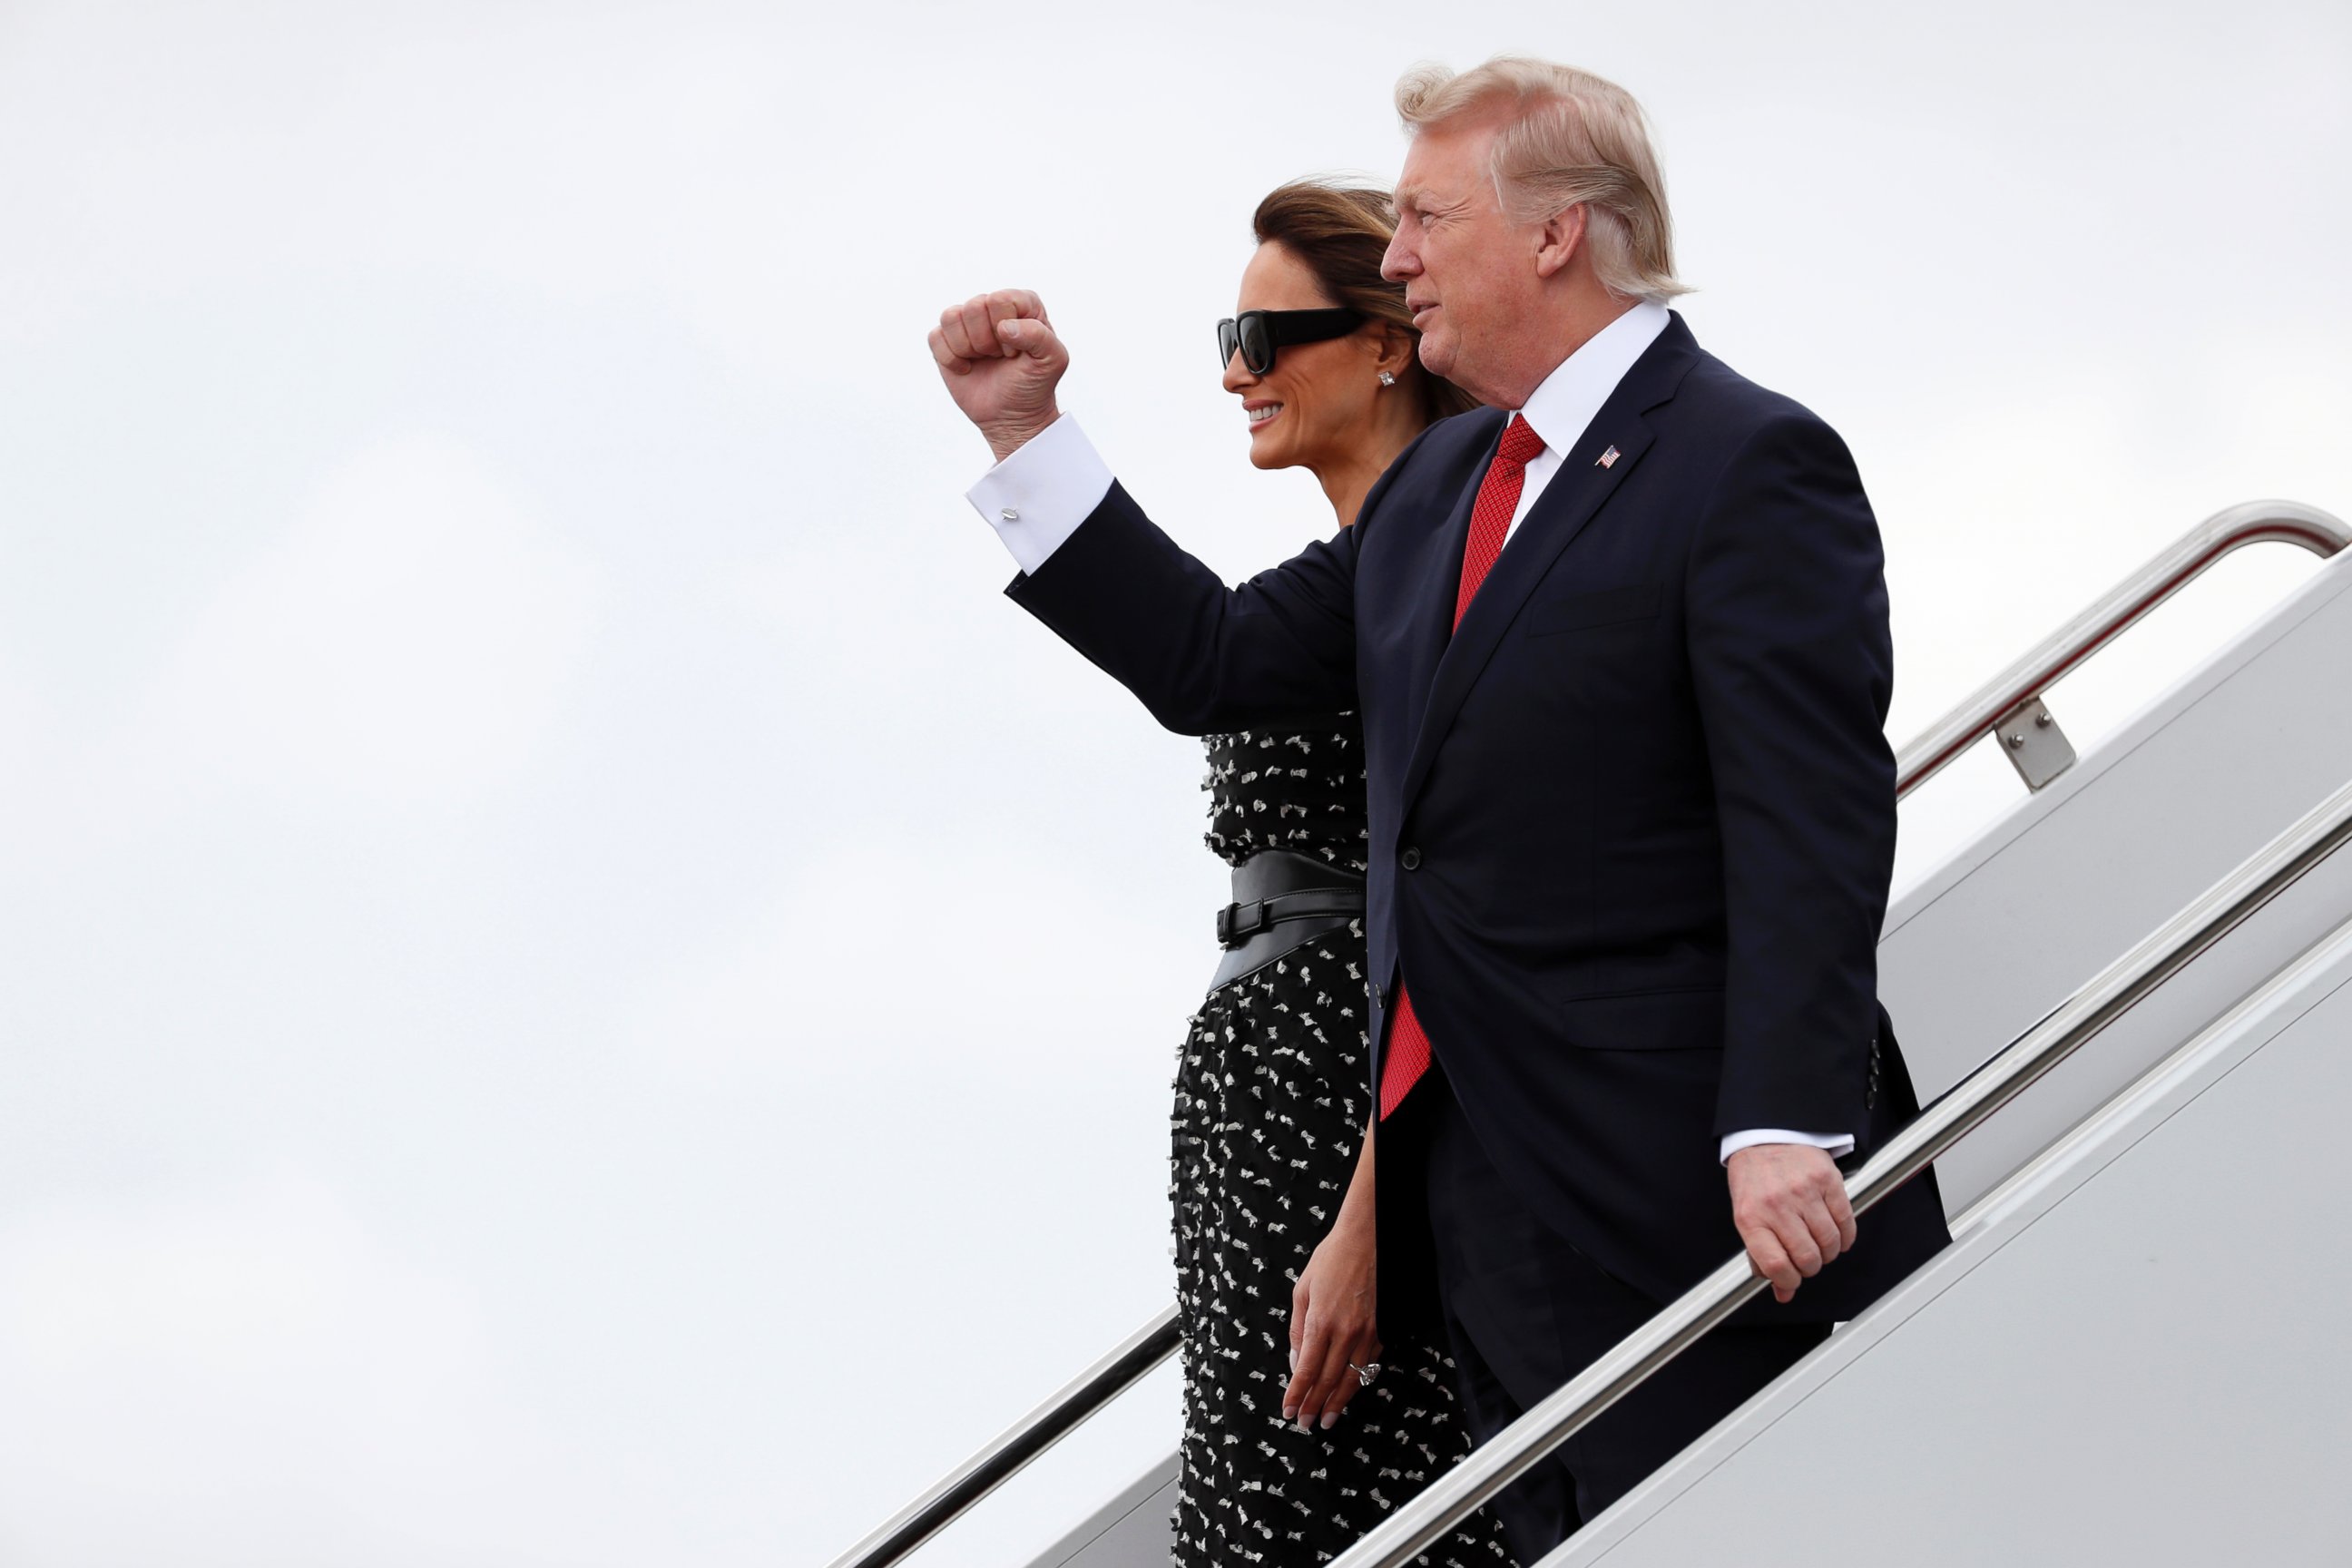 PHOTO: President Donald Trump and first lady Melania Trump walk down the stairs of Air Force One as they arrive at the Palm Beach International Airport, April 6, 2017, in West Palm Beach, Fla., en route to Mar-a-Largo.